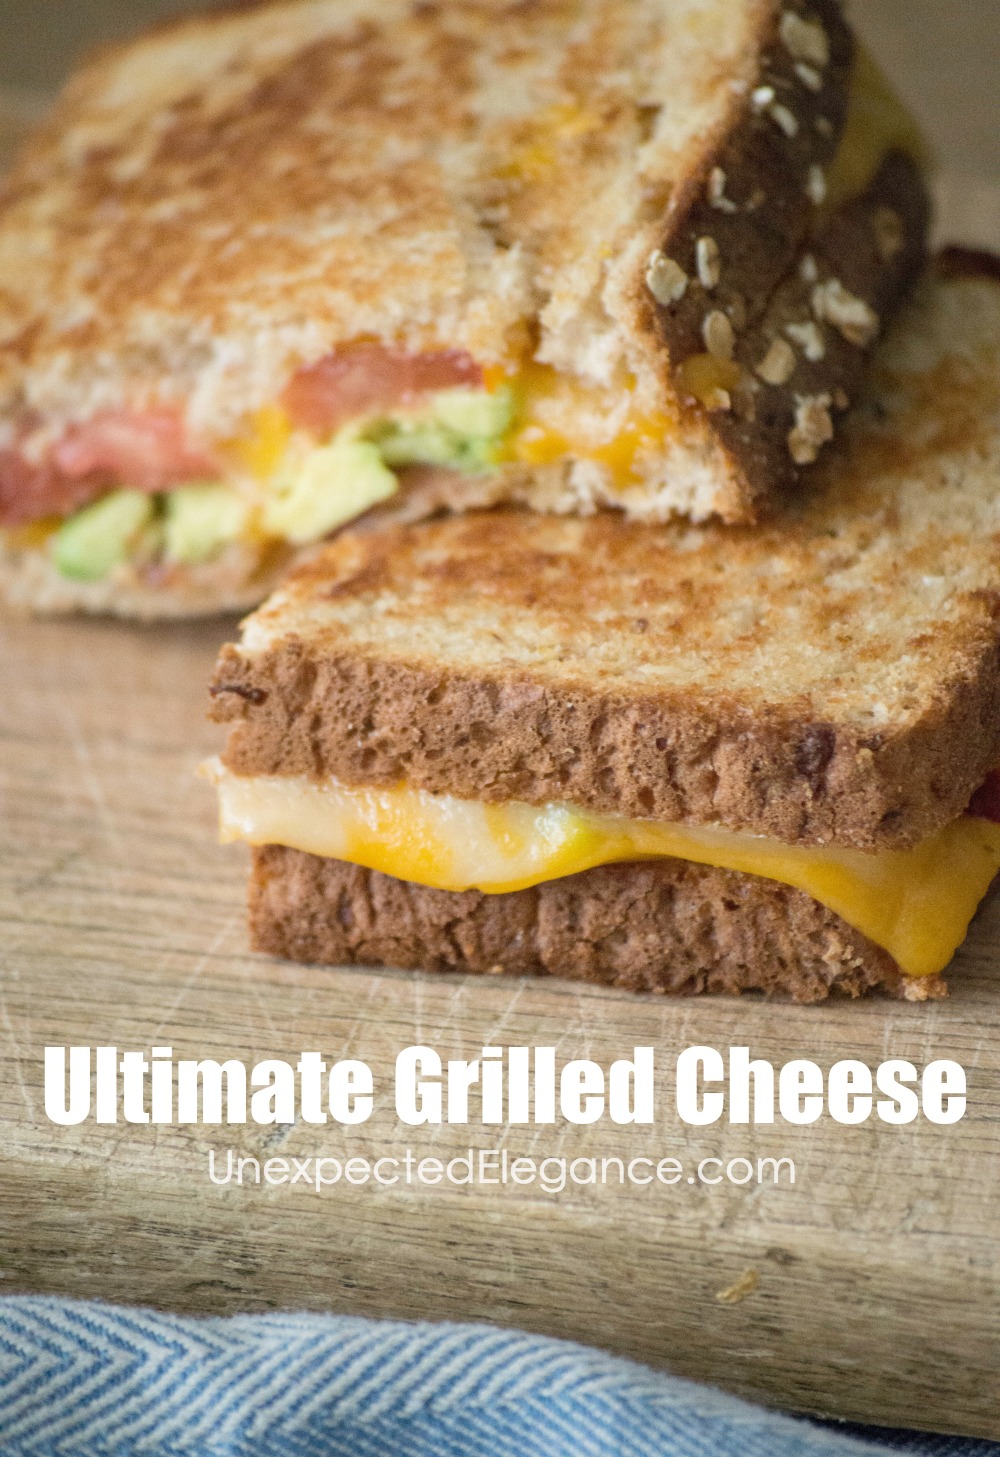 A super easy and fun take on the traditional grilled cheese sandwich! Step by step instructions for how to assemble this delicious ULTIMATE GRILLED CHEESE!!